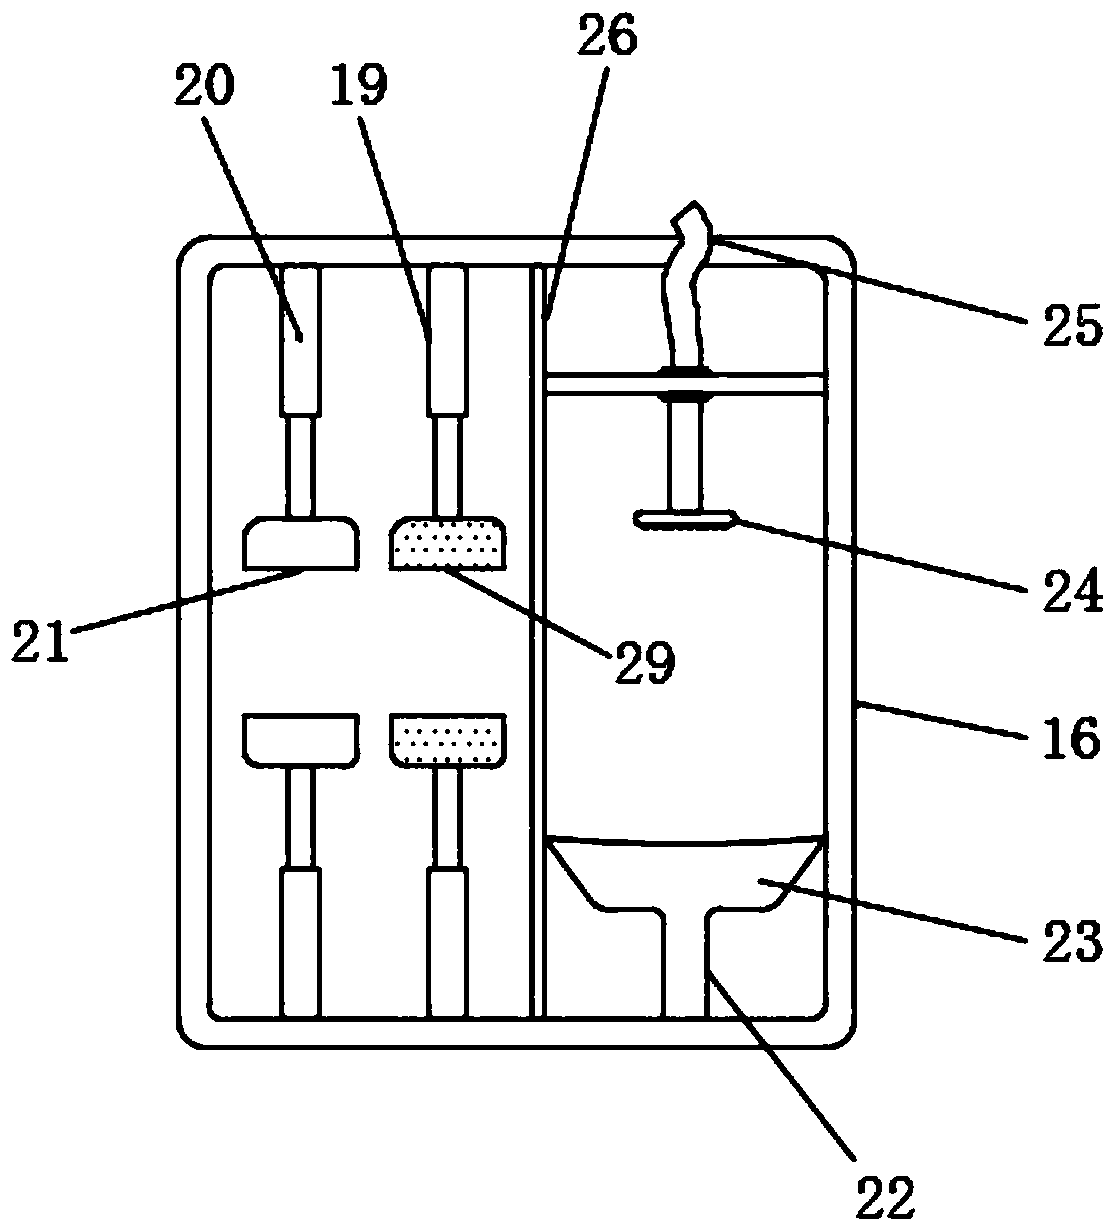 Integrated intelligent processing device